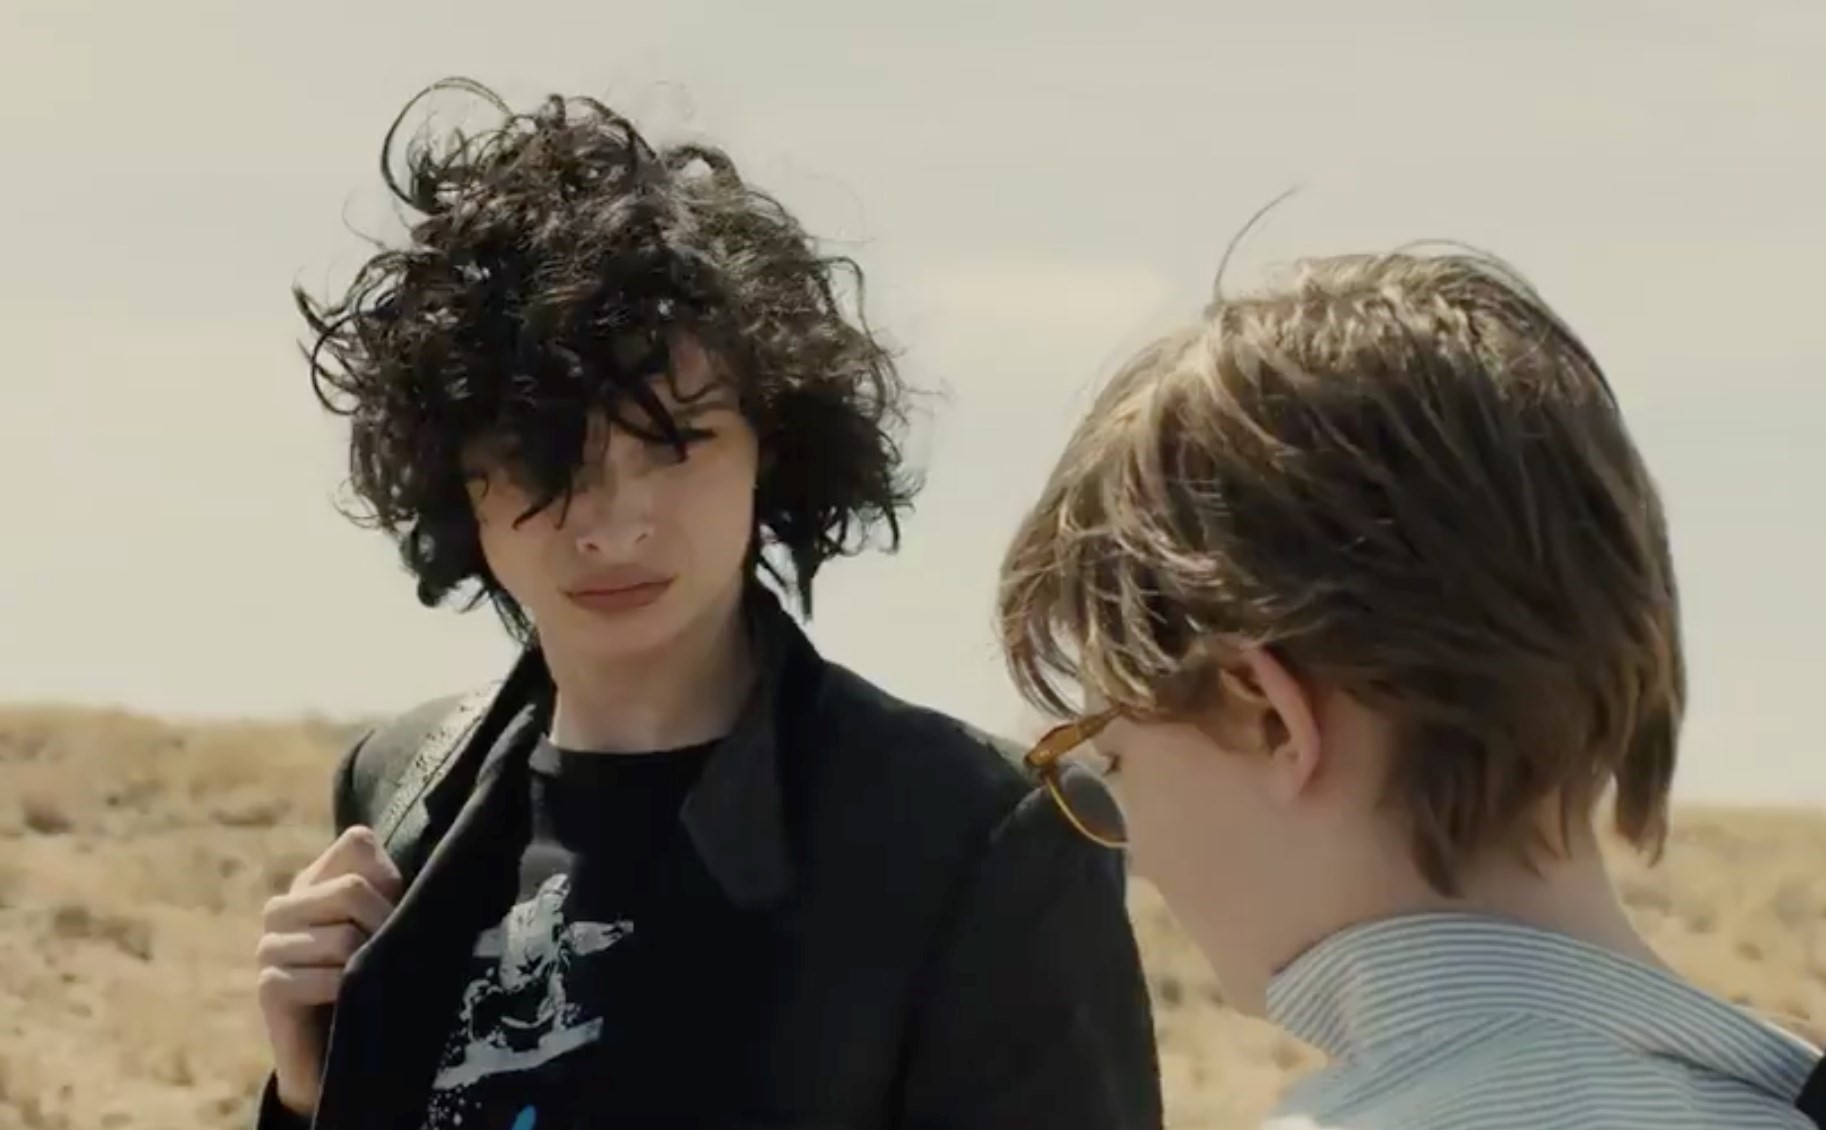 Watch The Goldfinch trailer featuring Finn Wolfhard and Perfume Genius |  Dazed